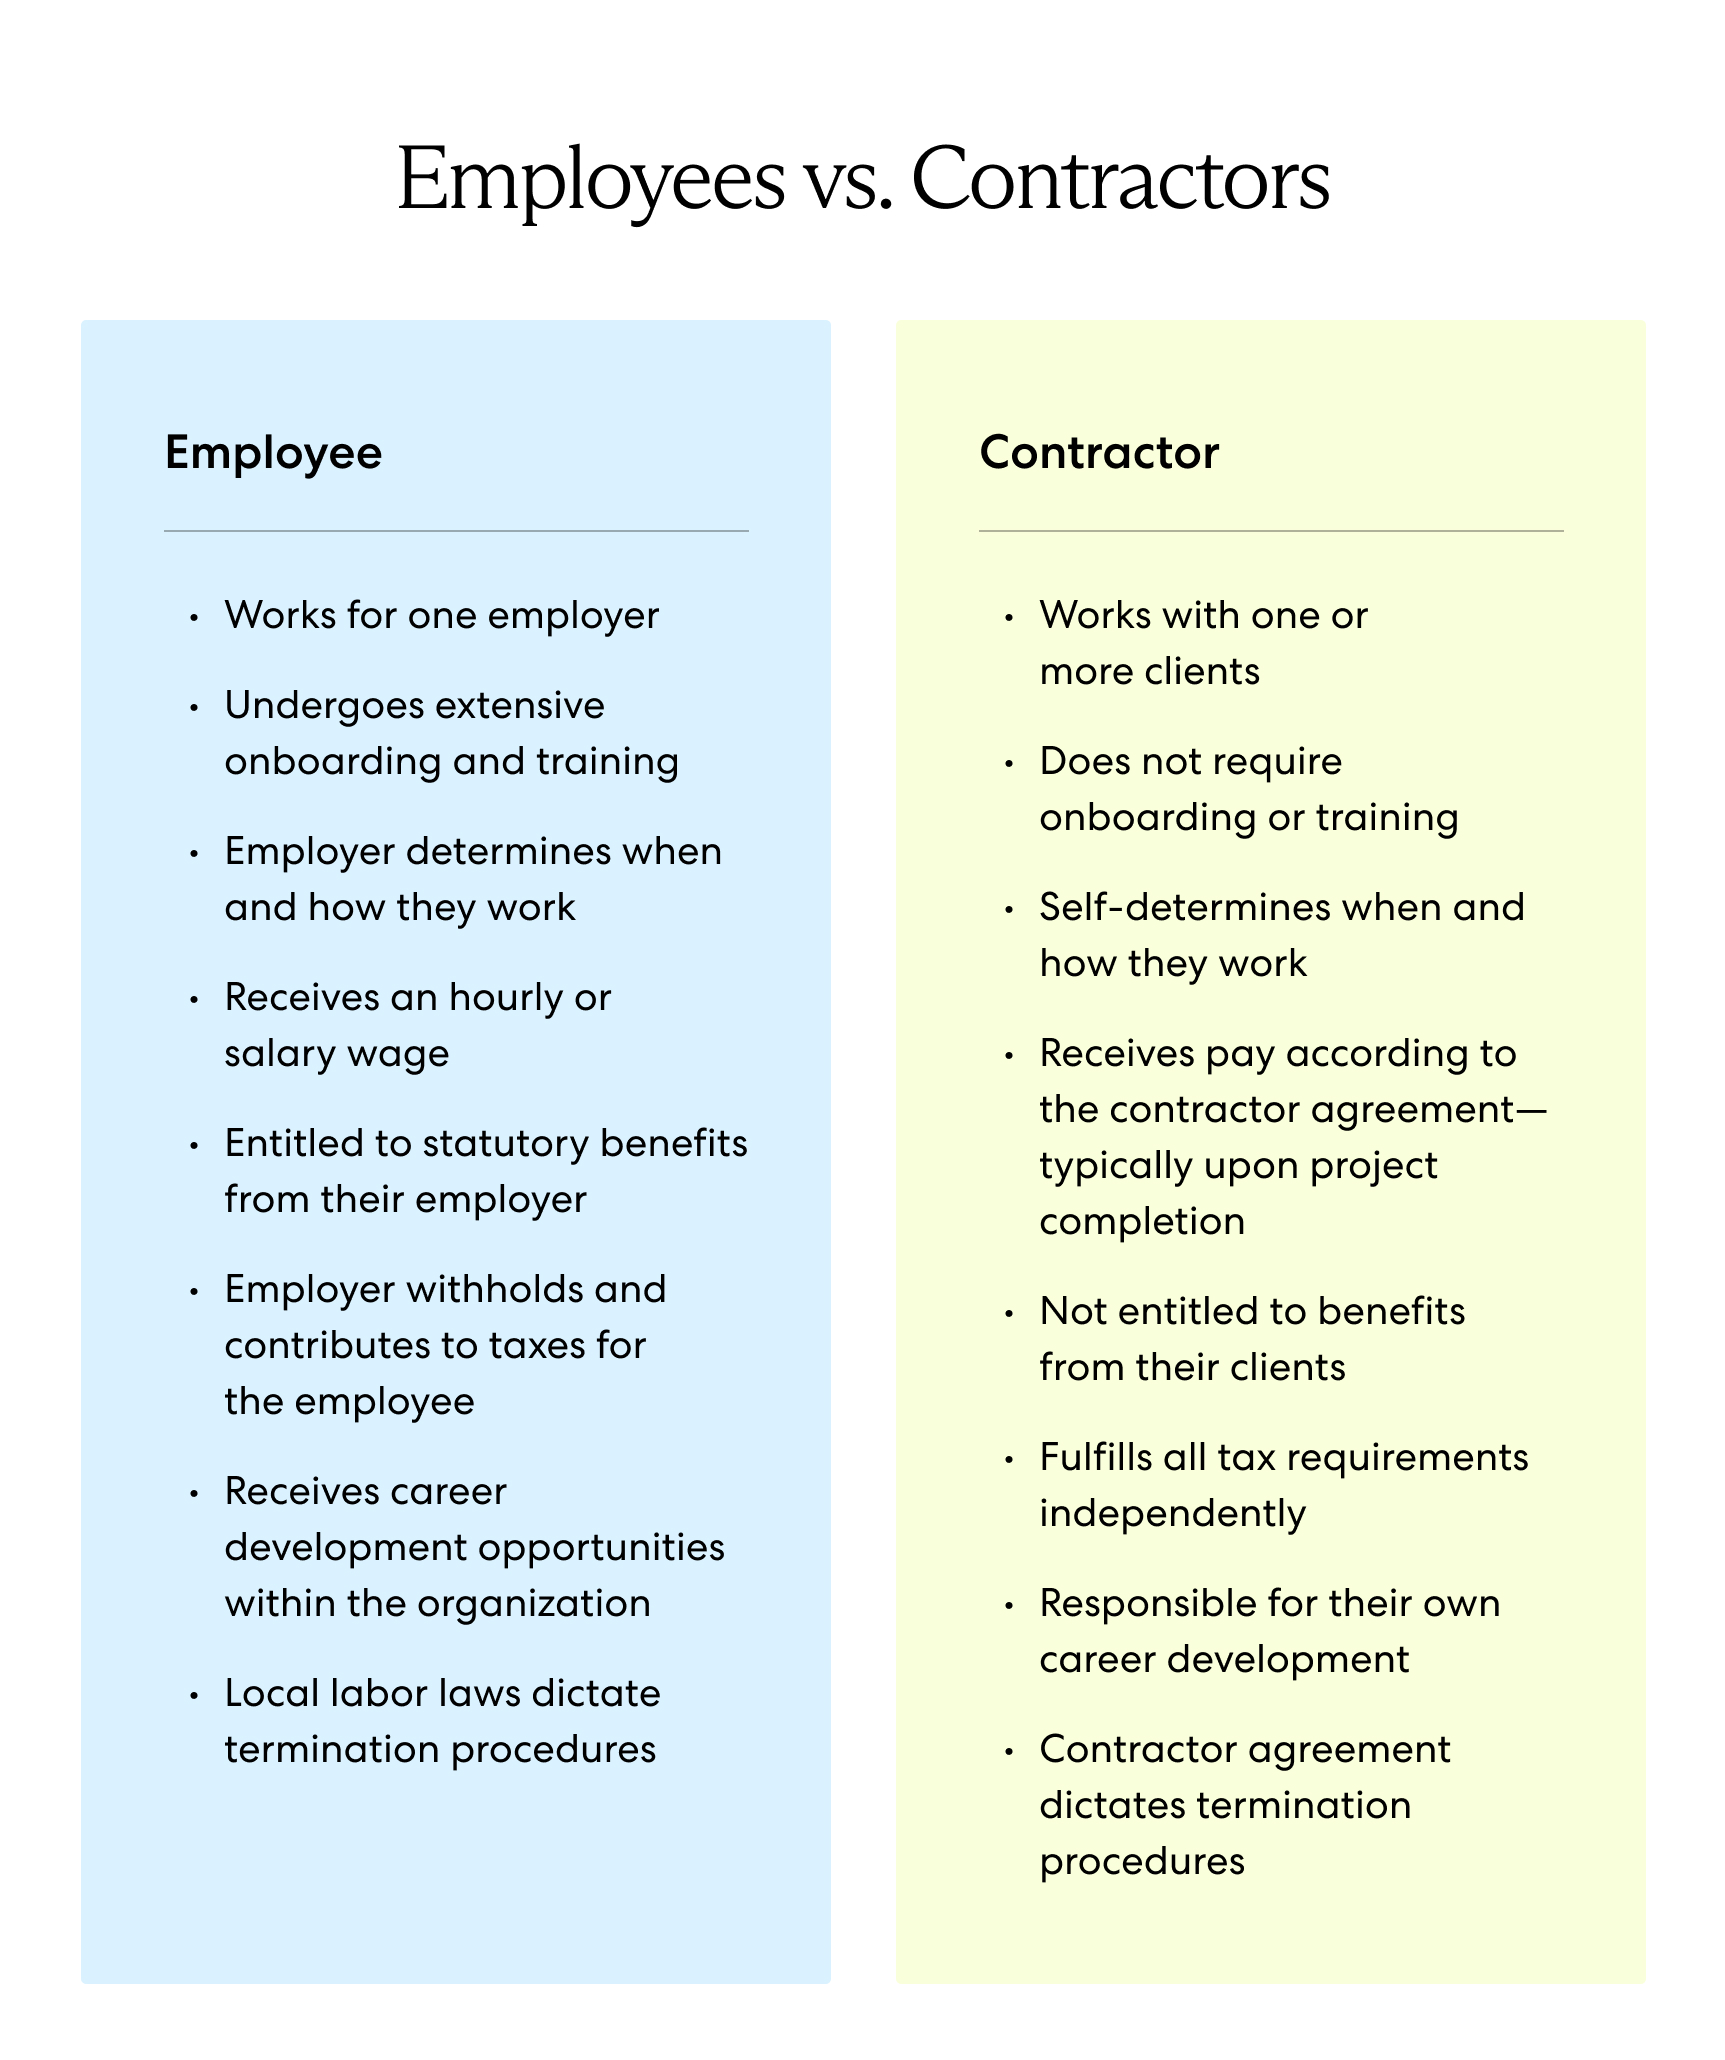 Key differences between contractors and employees revolve around work autonomy, benefits, and taxes